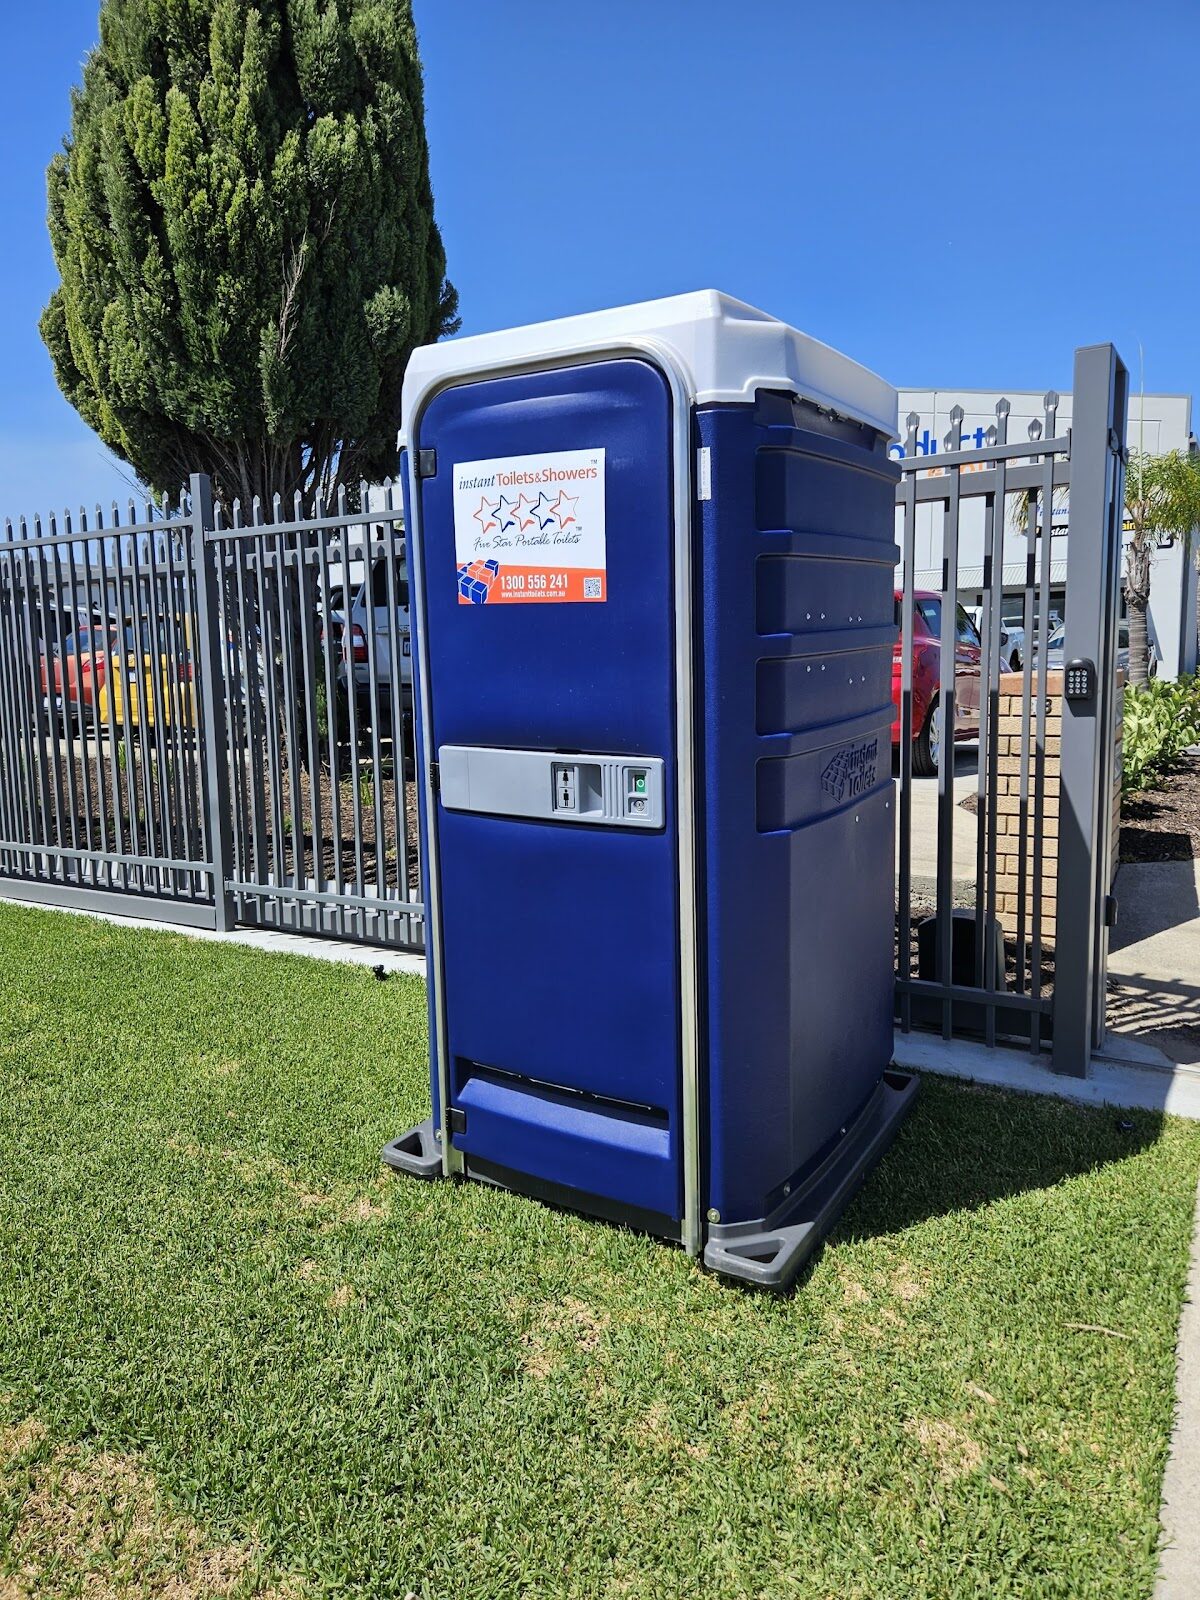 Blue Five Star Event Chemical Toilet with LED Lighting next to a fence and tree in a sunny outdoor setting.